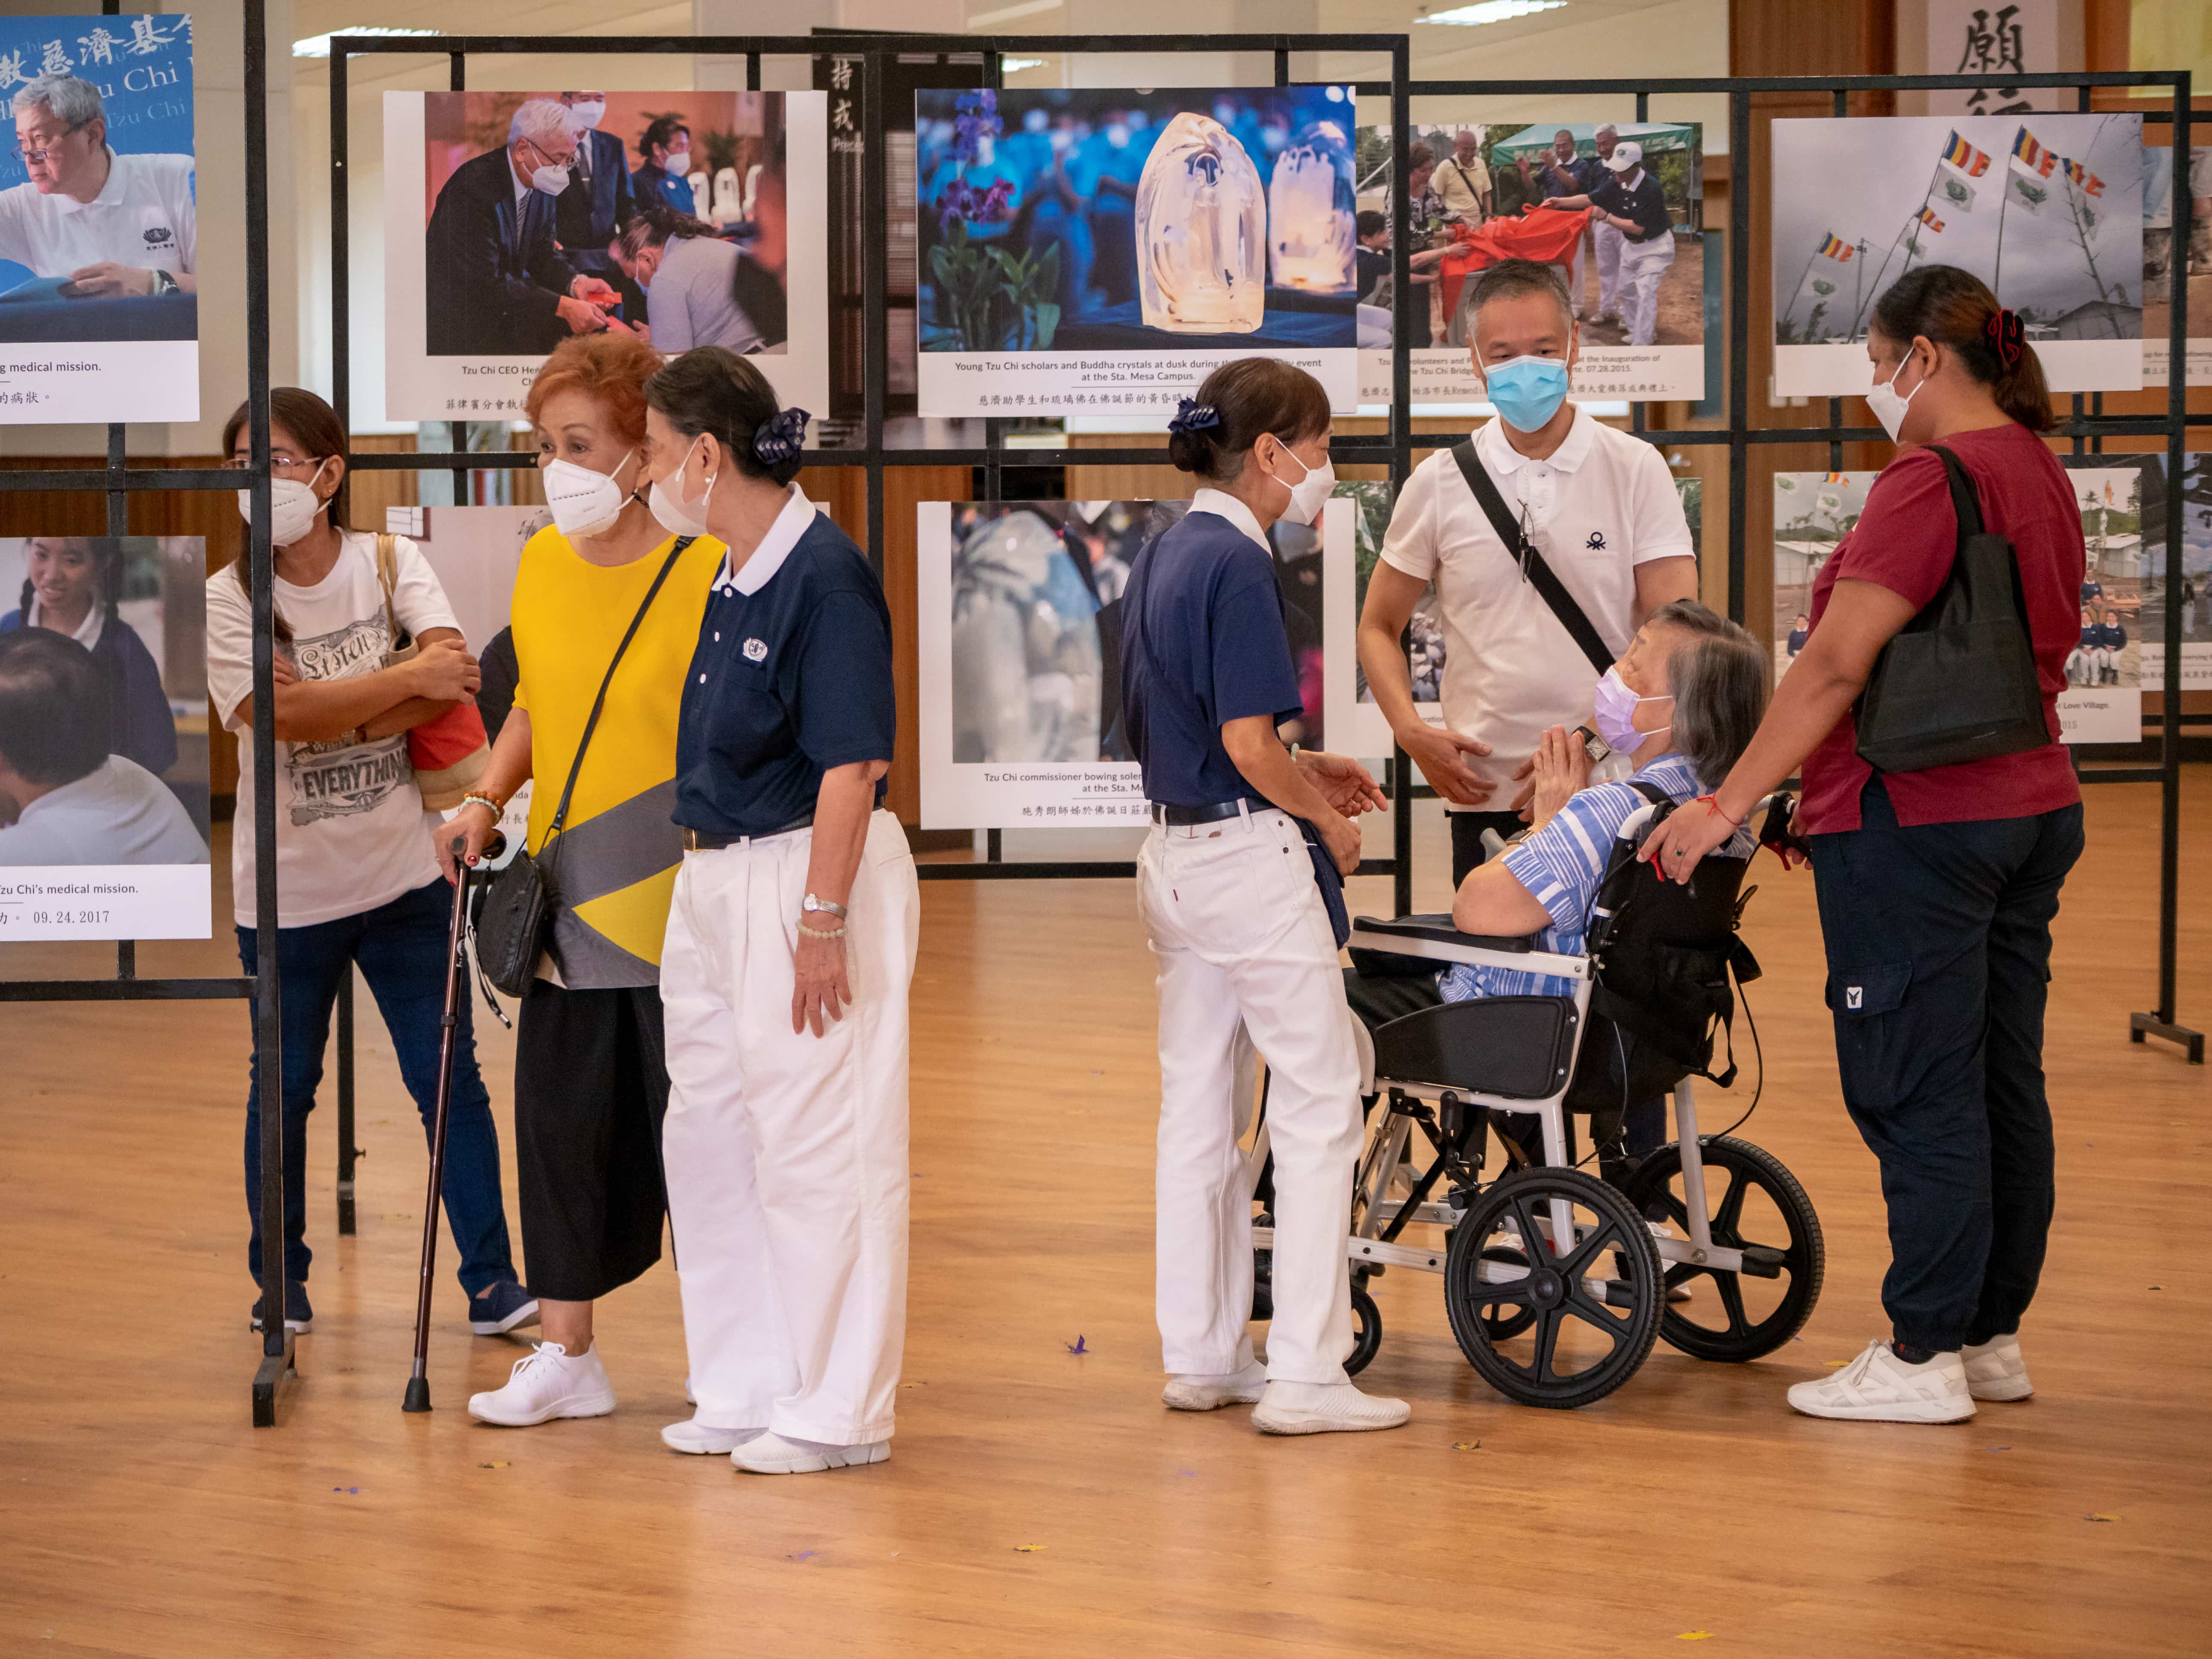 Tzu Chi volunteers and their relatives visiting the photo gallery.【Photo by Daniel Lazar】